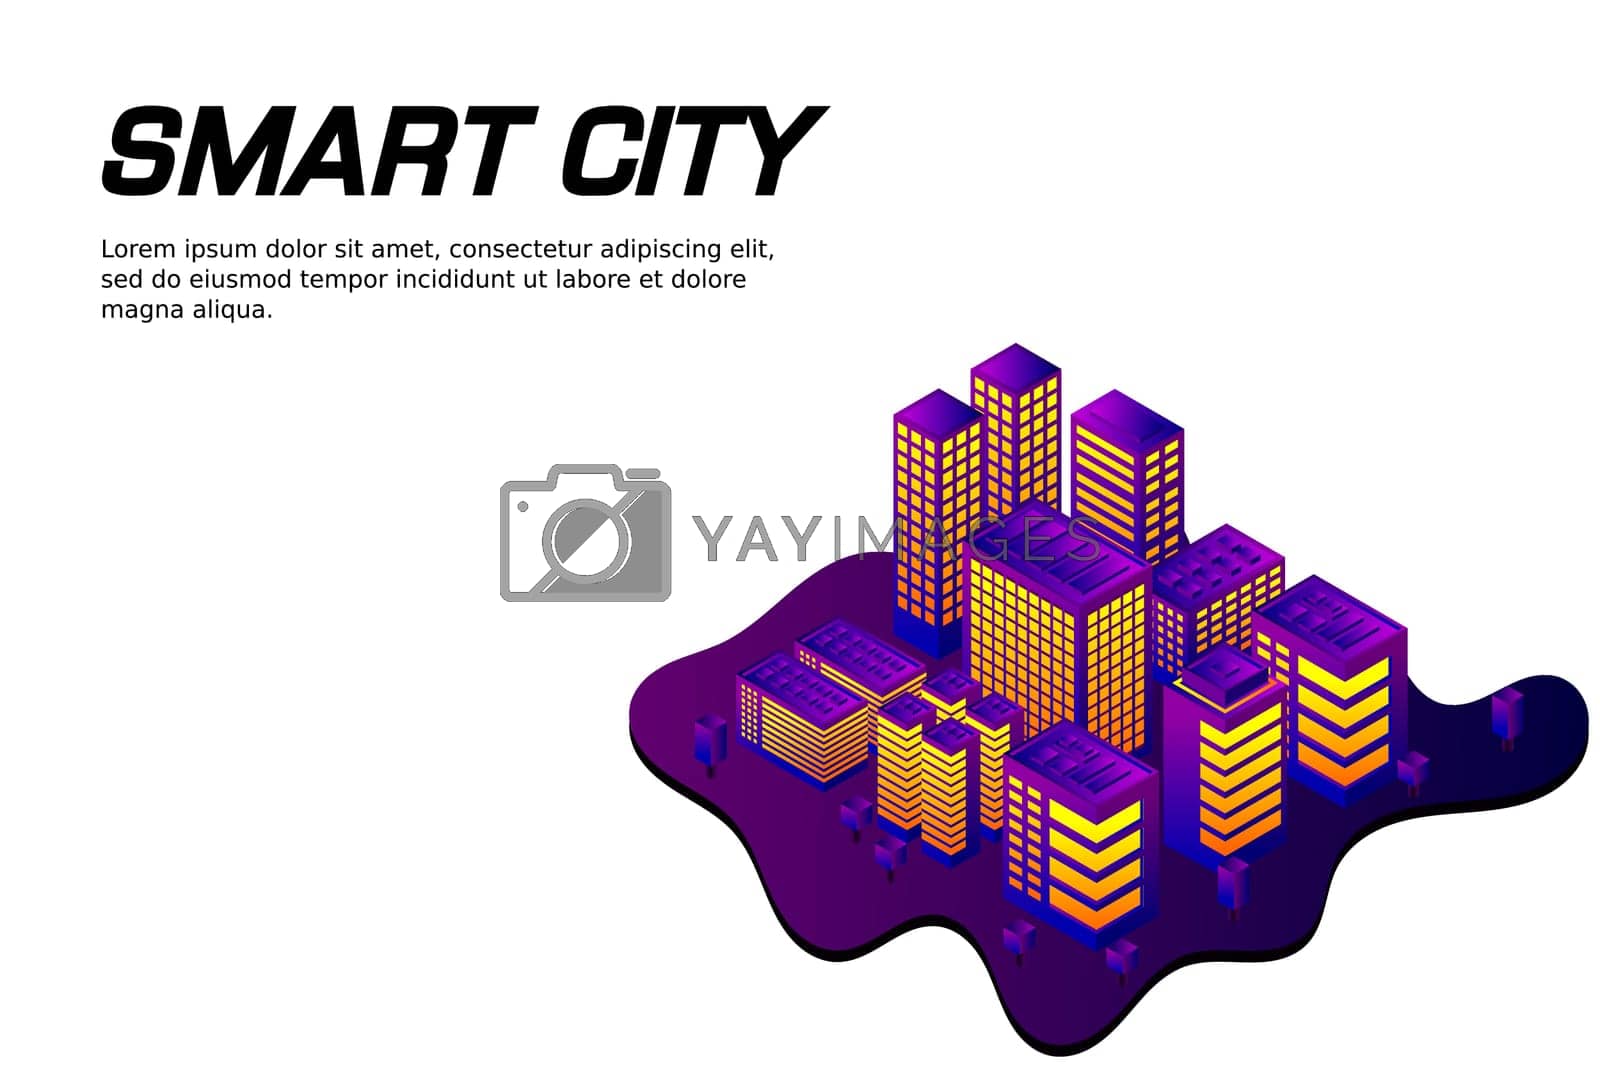 Royalty free image of Isometric Future City. Real estate and construction industry concept by Aozora